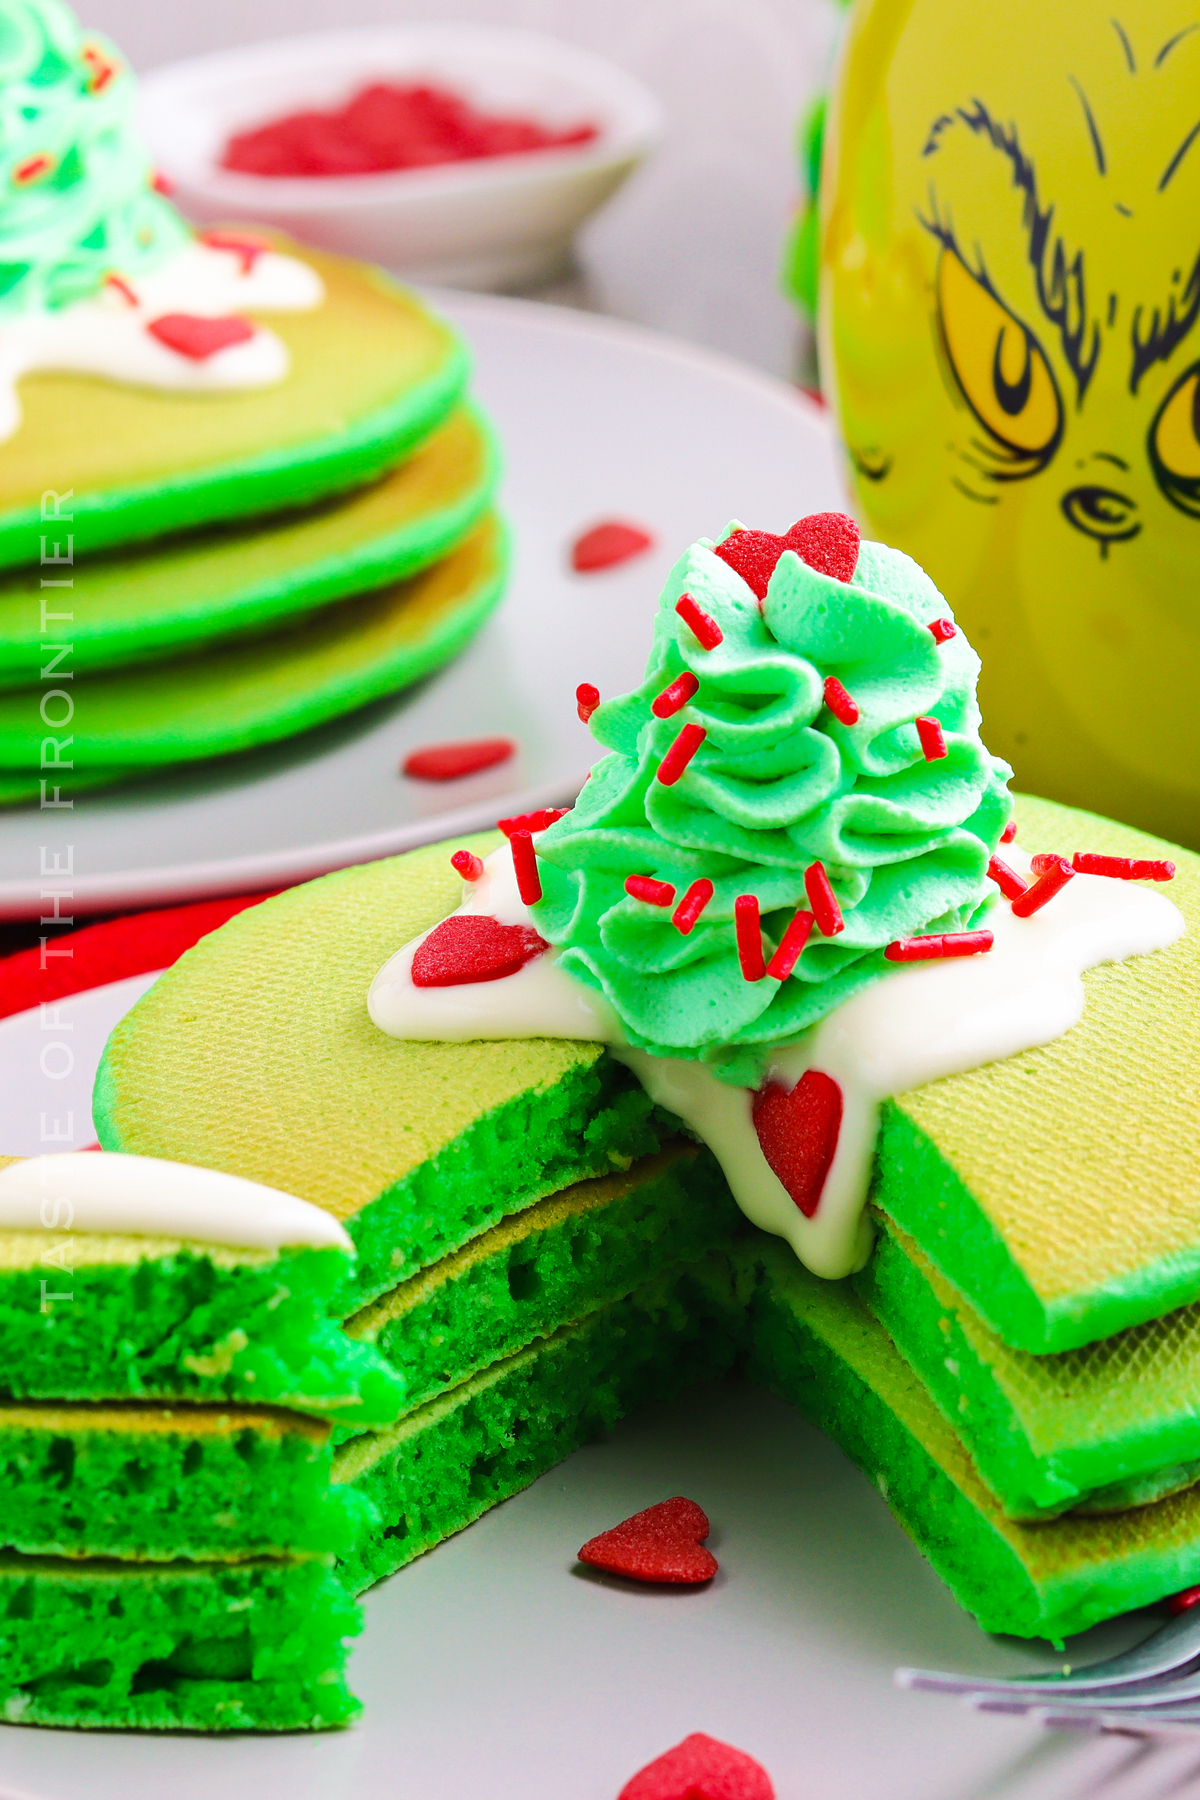 Grinch Pancakes ❤️ . Another Grinch idea from a few years ago